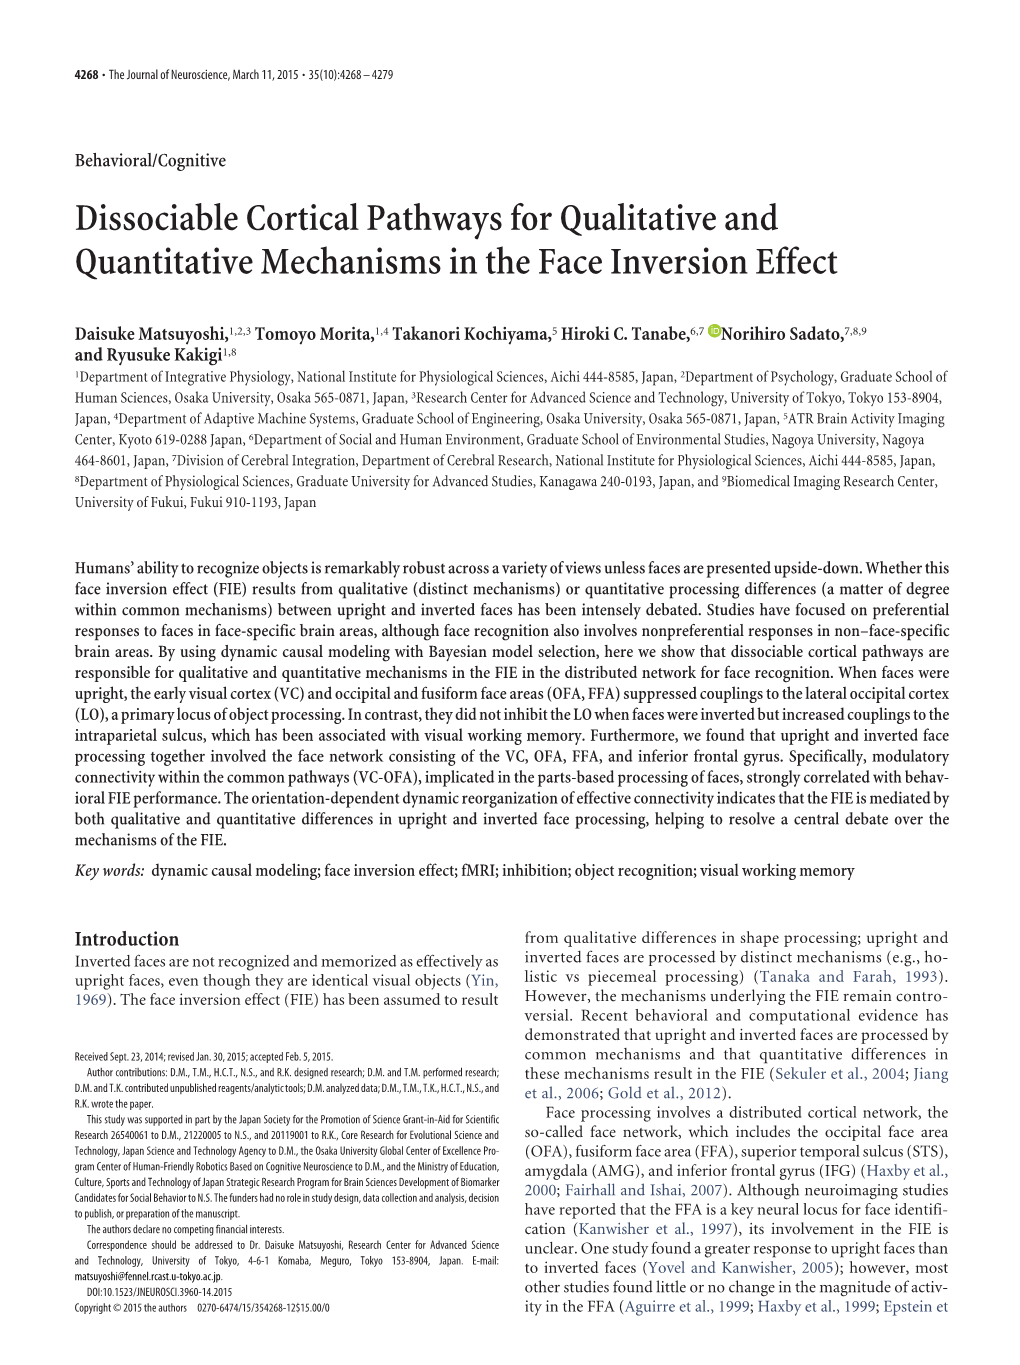 Dissociable Cortical Pathways for Qualitative and Quantitative Mechanisms in the Face Inversion Effect